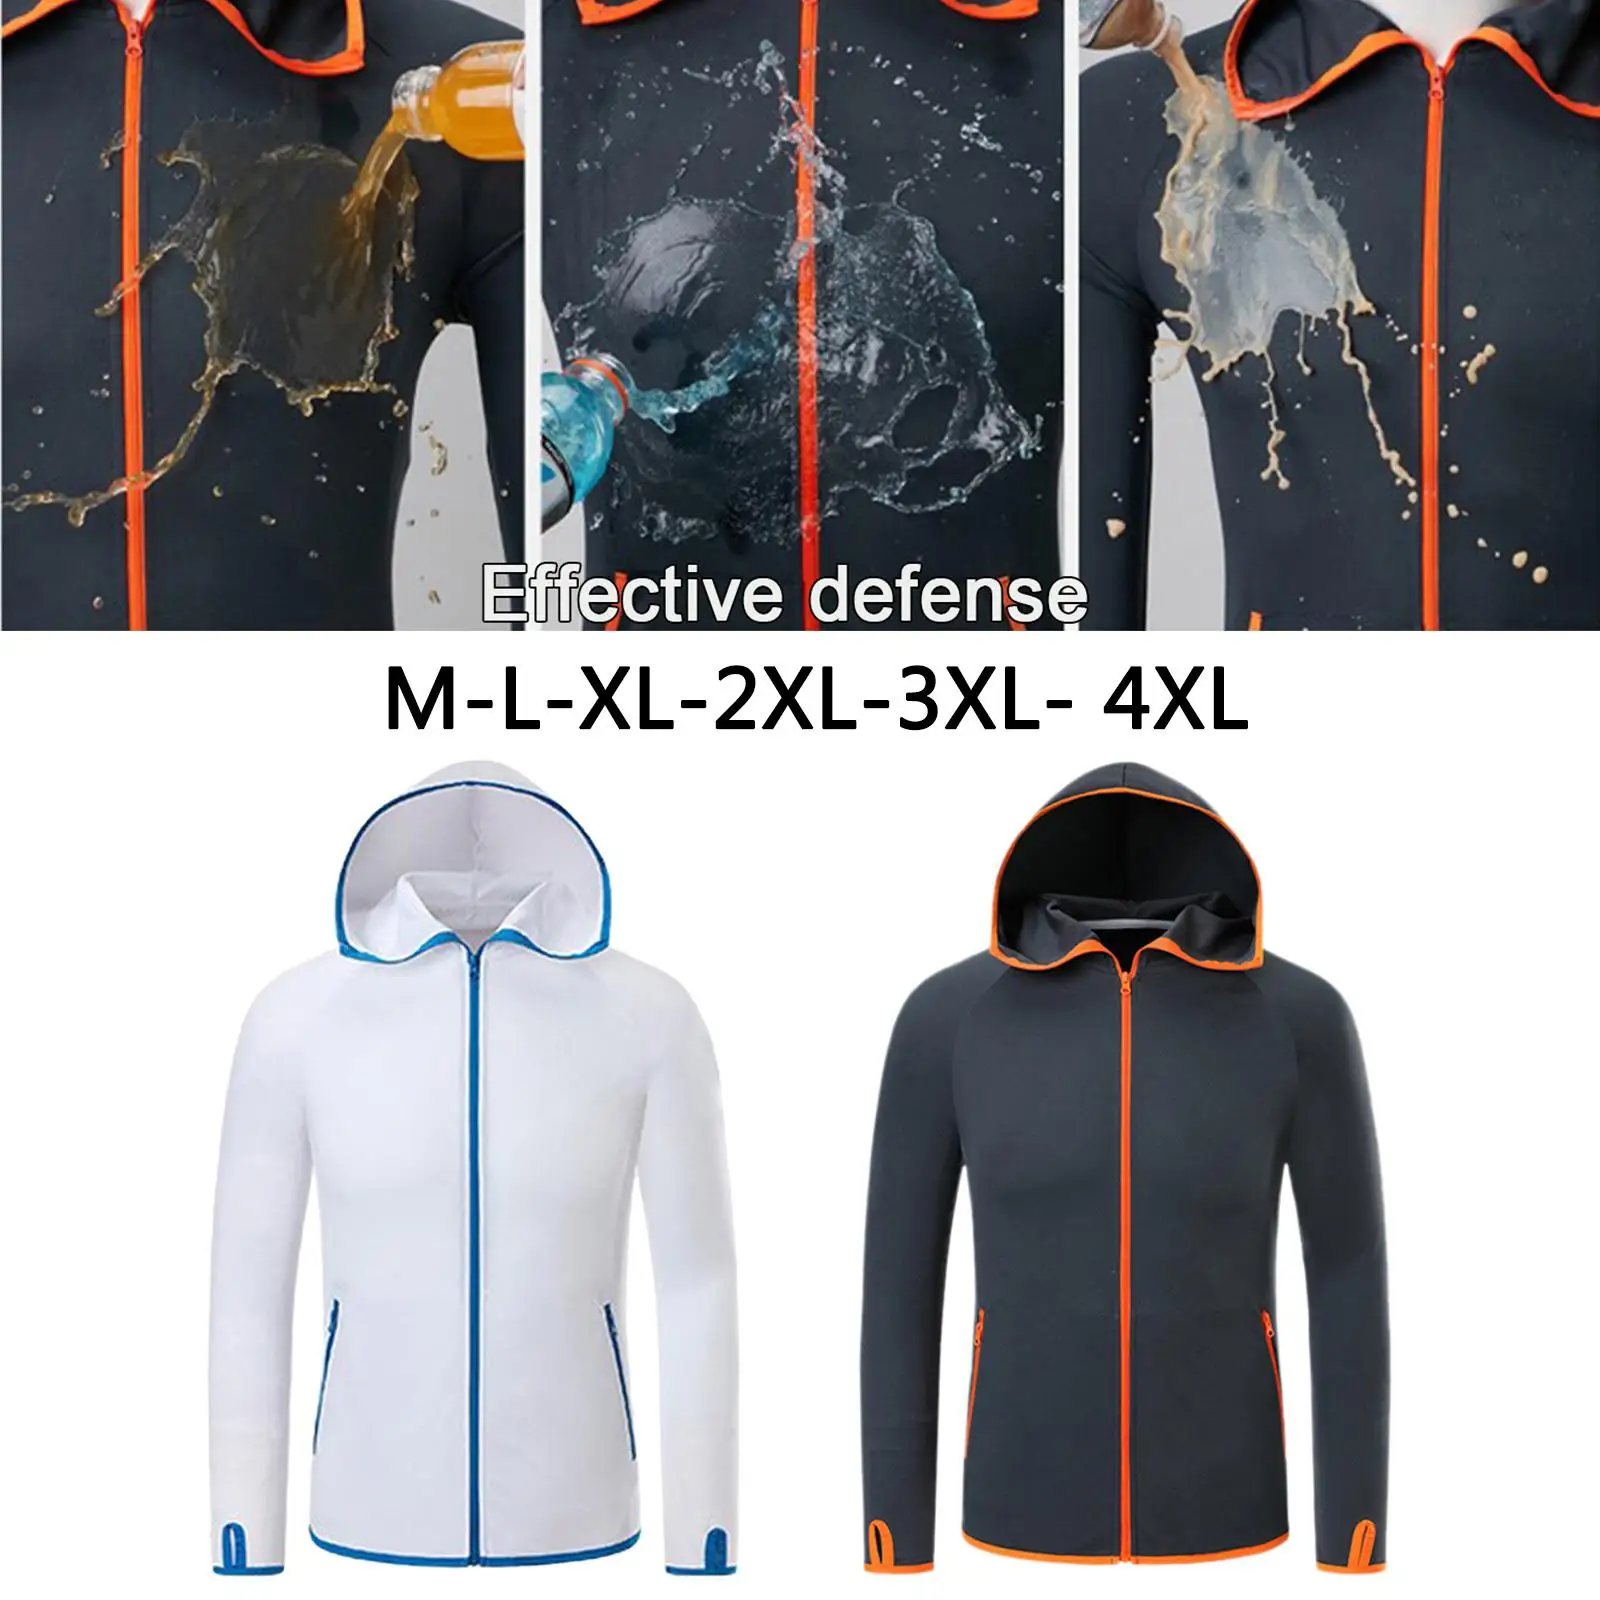 Outdoor light Hooded Jacket Through Protective Shirt for